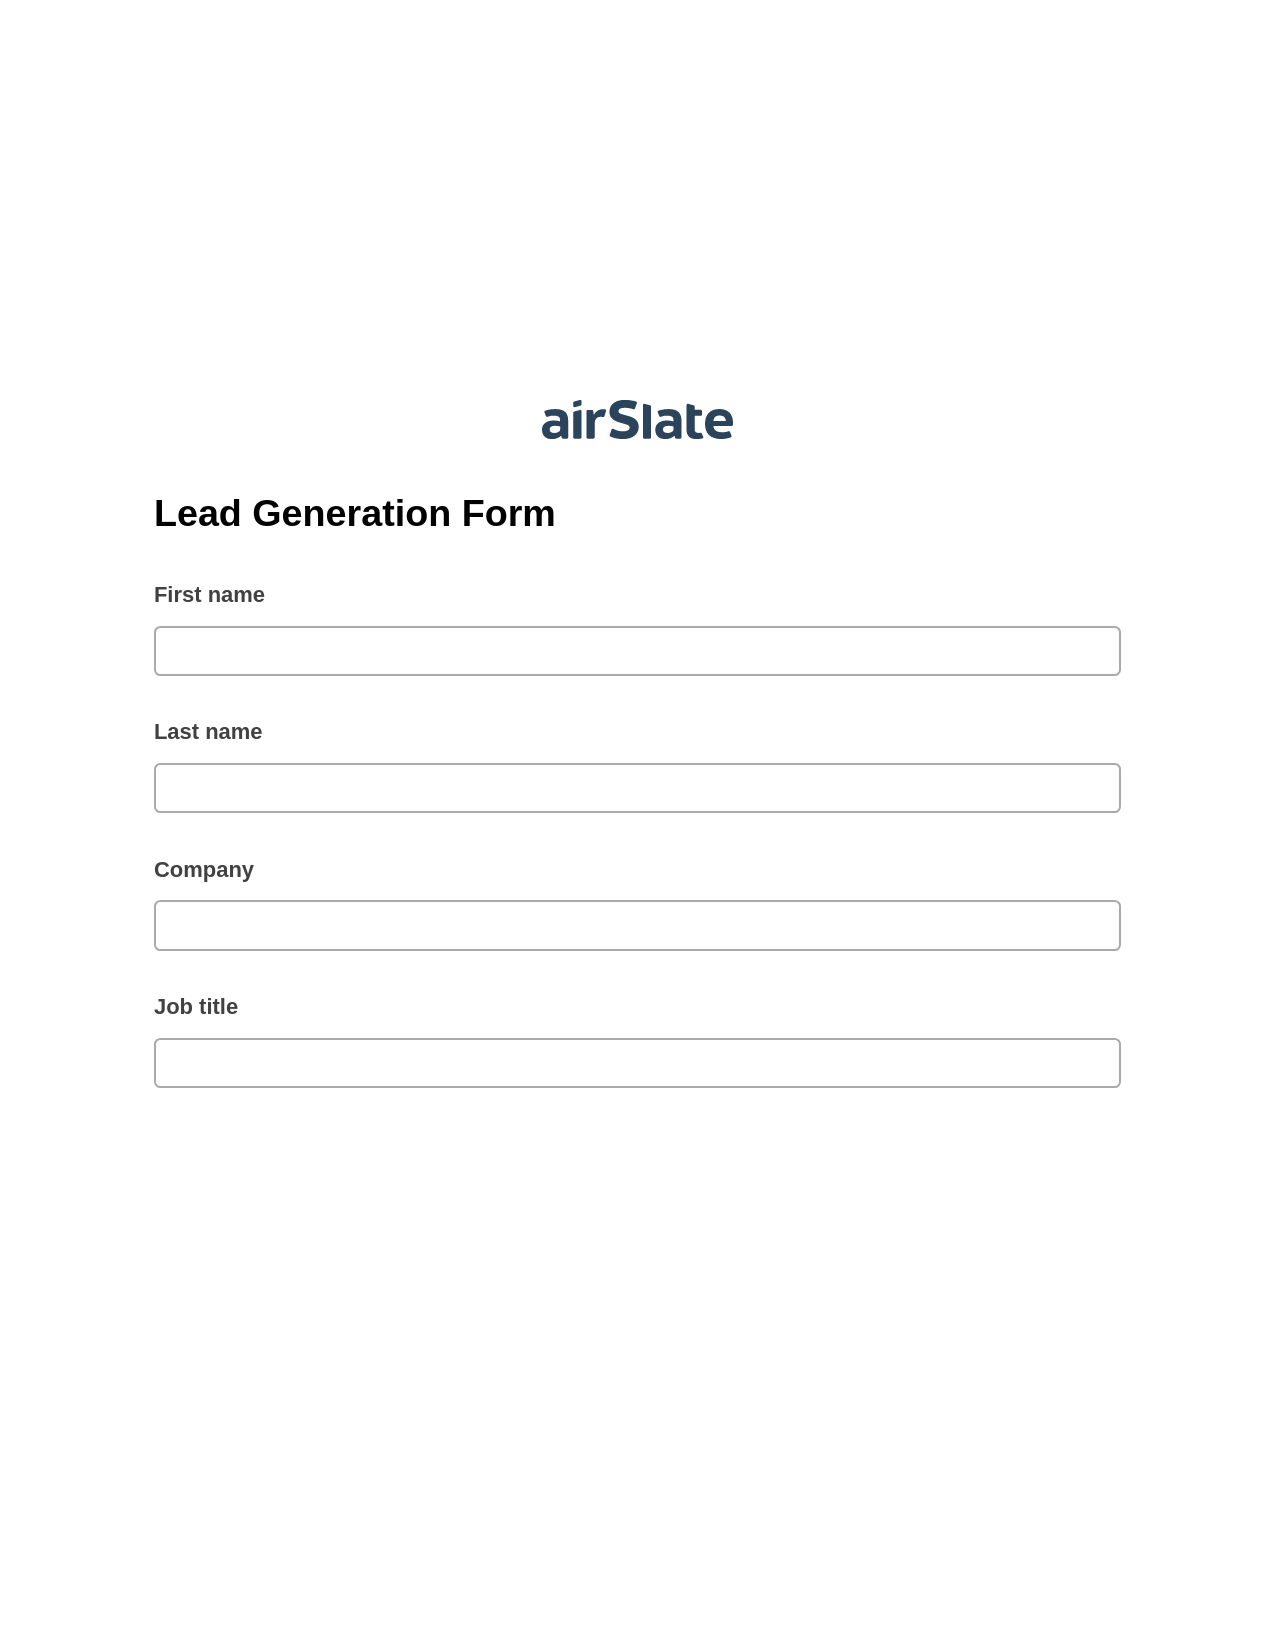 Lead Generation Form Pre-fill from Litmos bot, Remove Tags From Slate Bot, Archive to Google Drive Bot